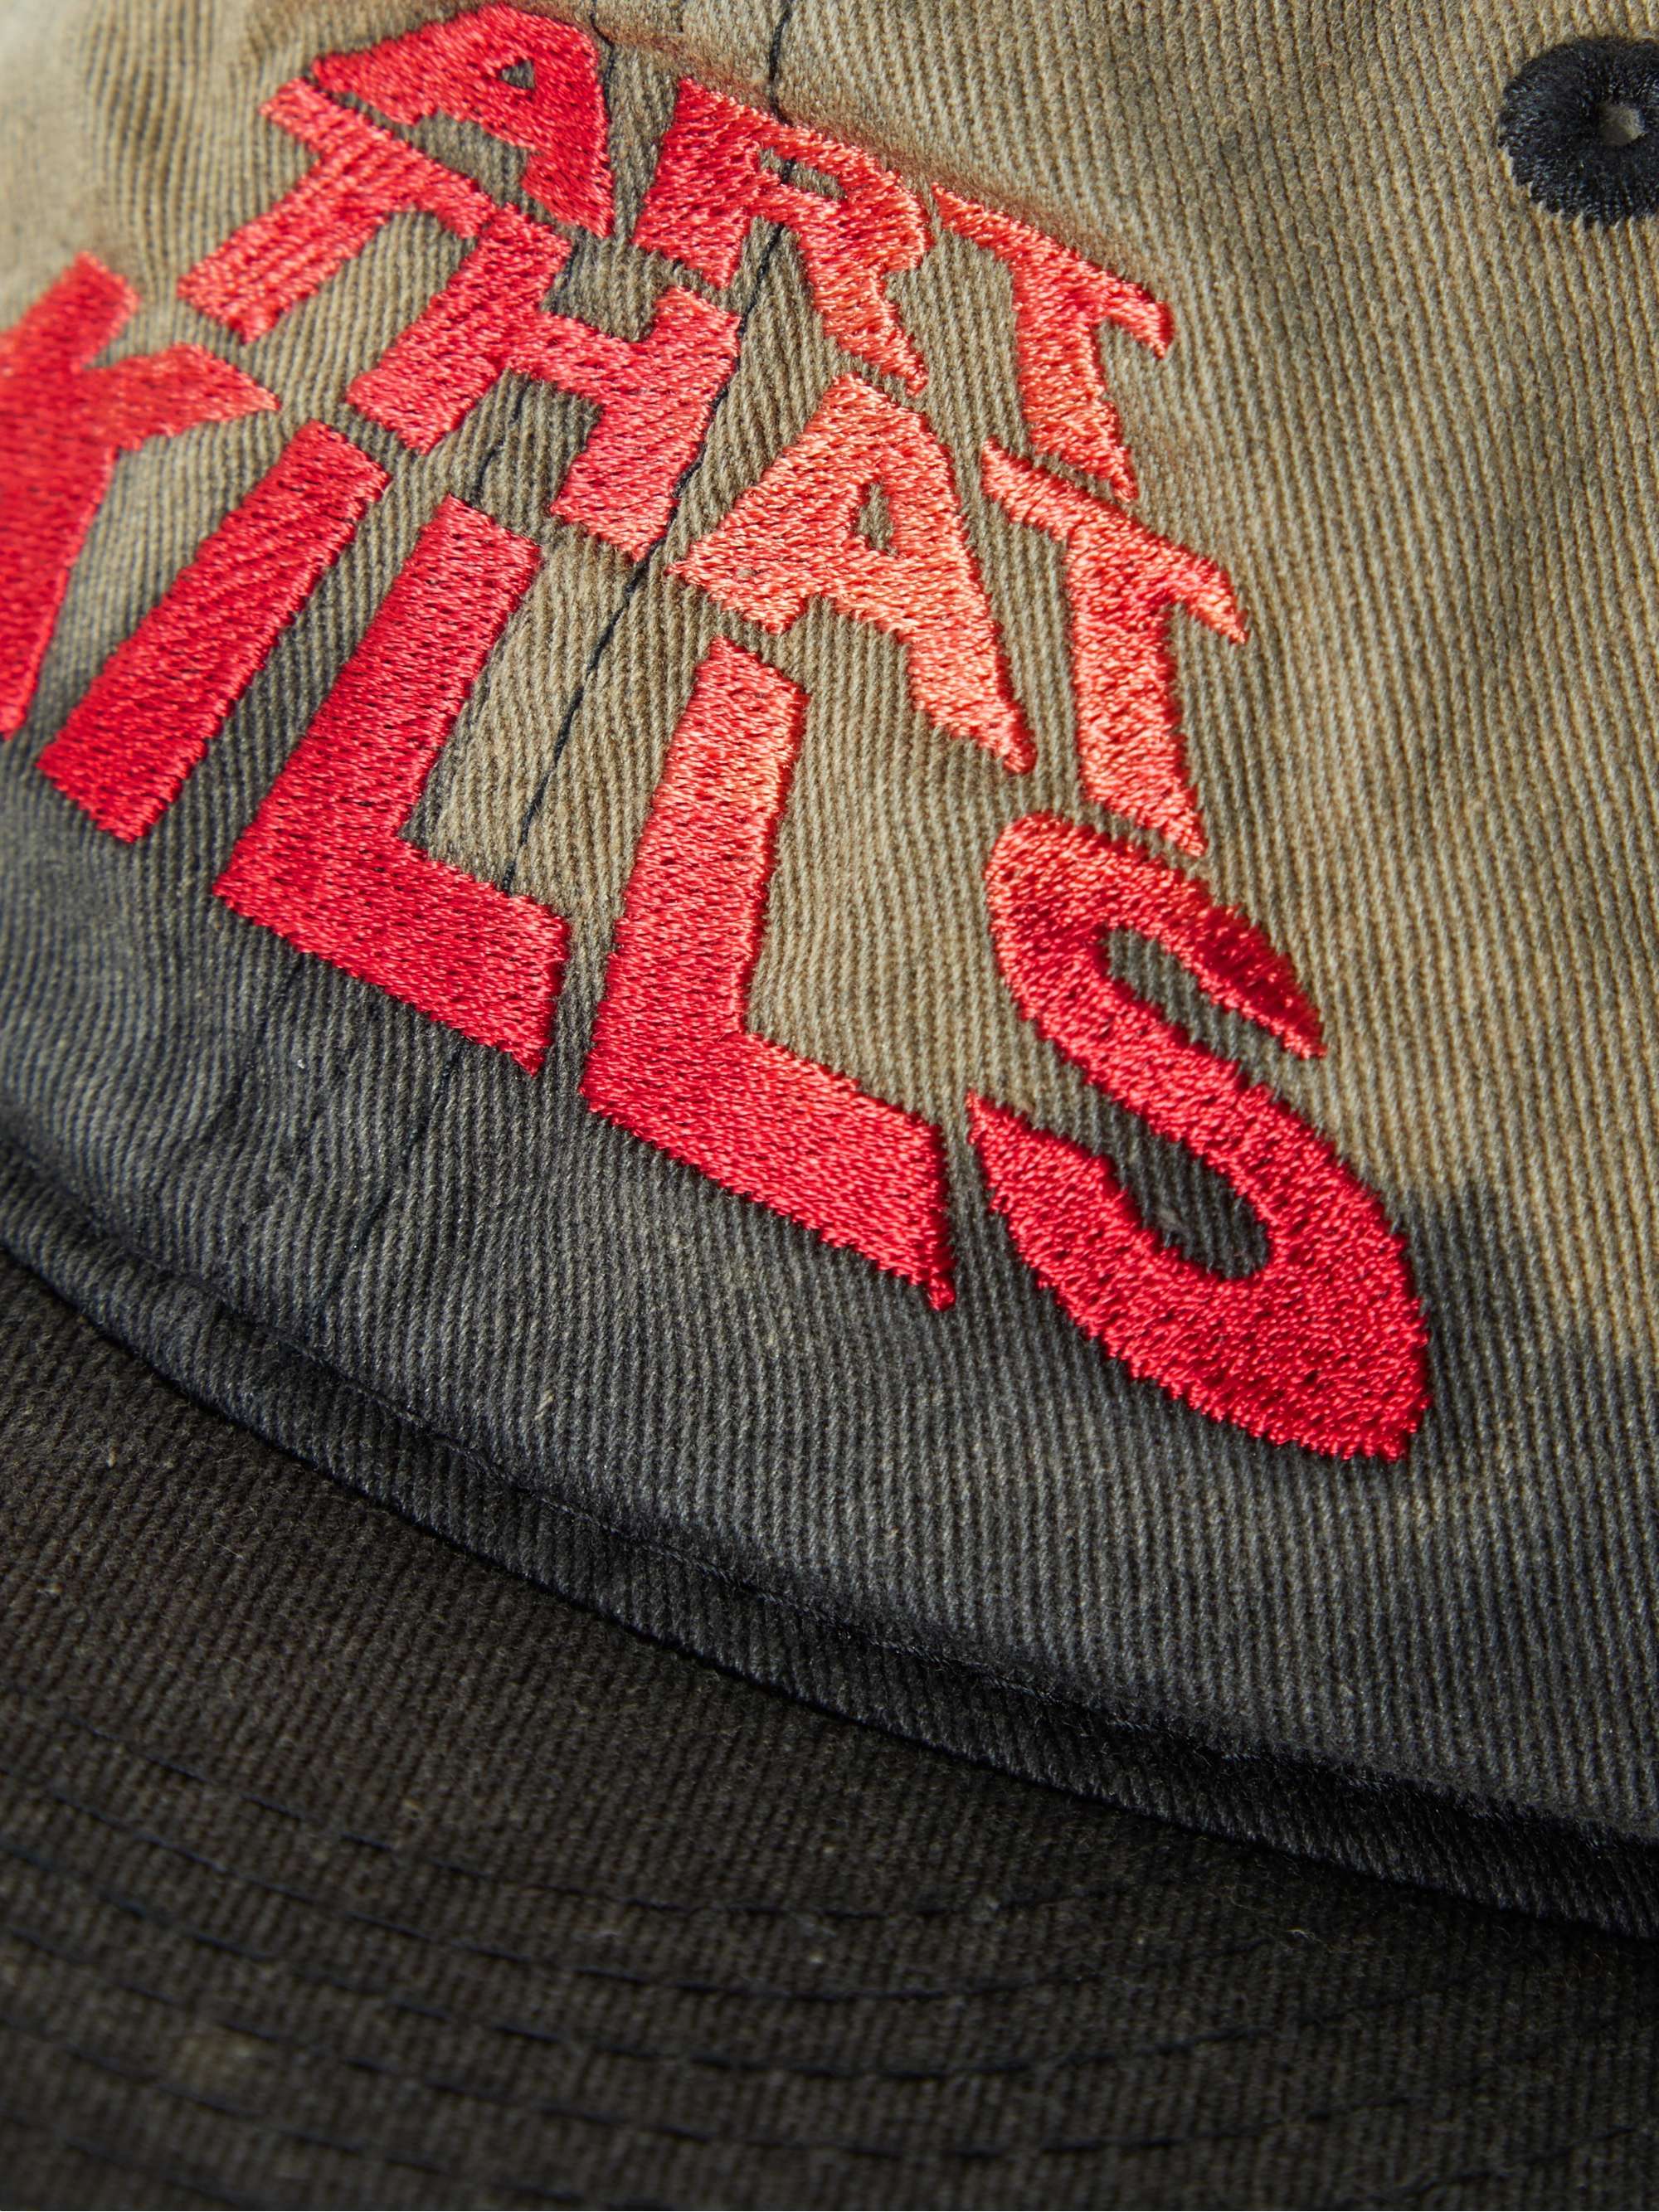 GALLERY DEPT. Distressed Embroidered Cotton-Twill Baseball Cap